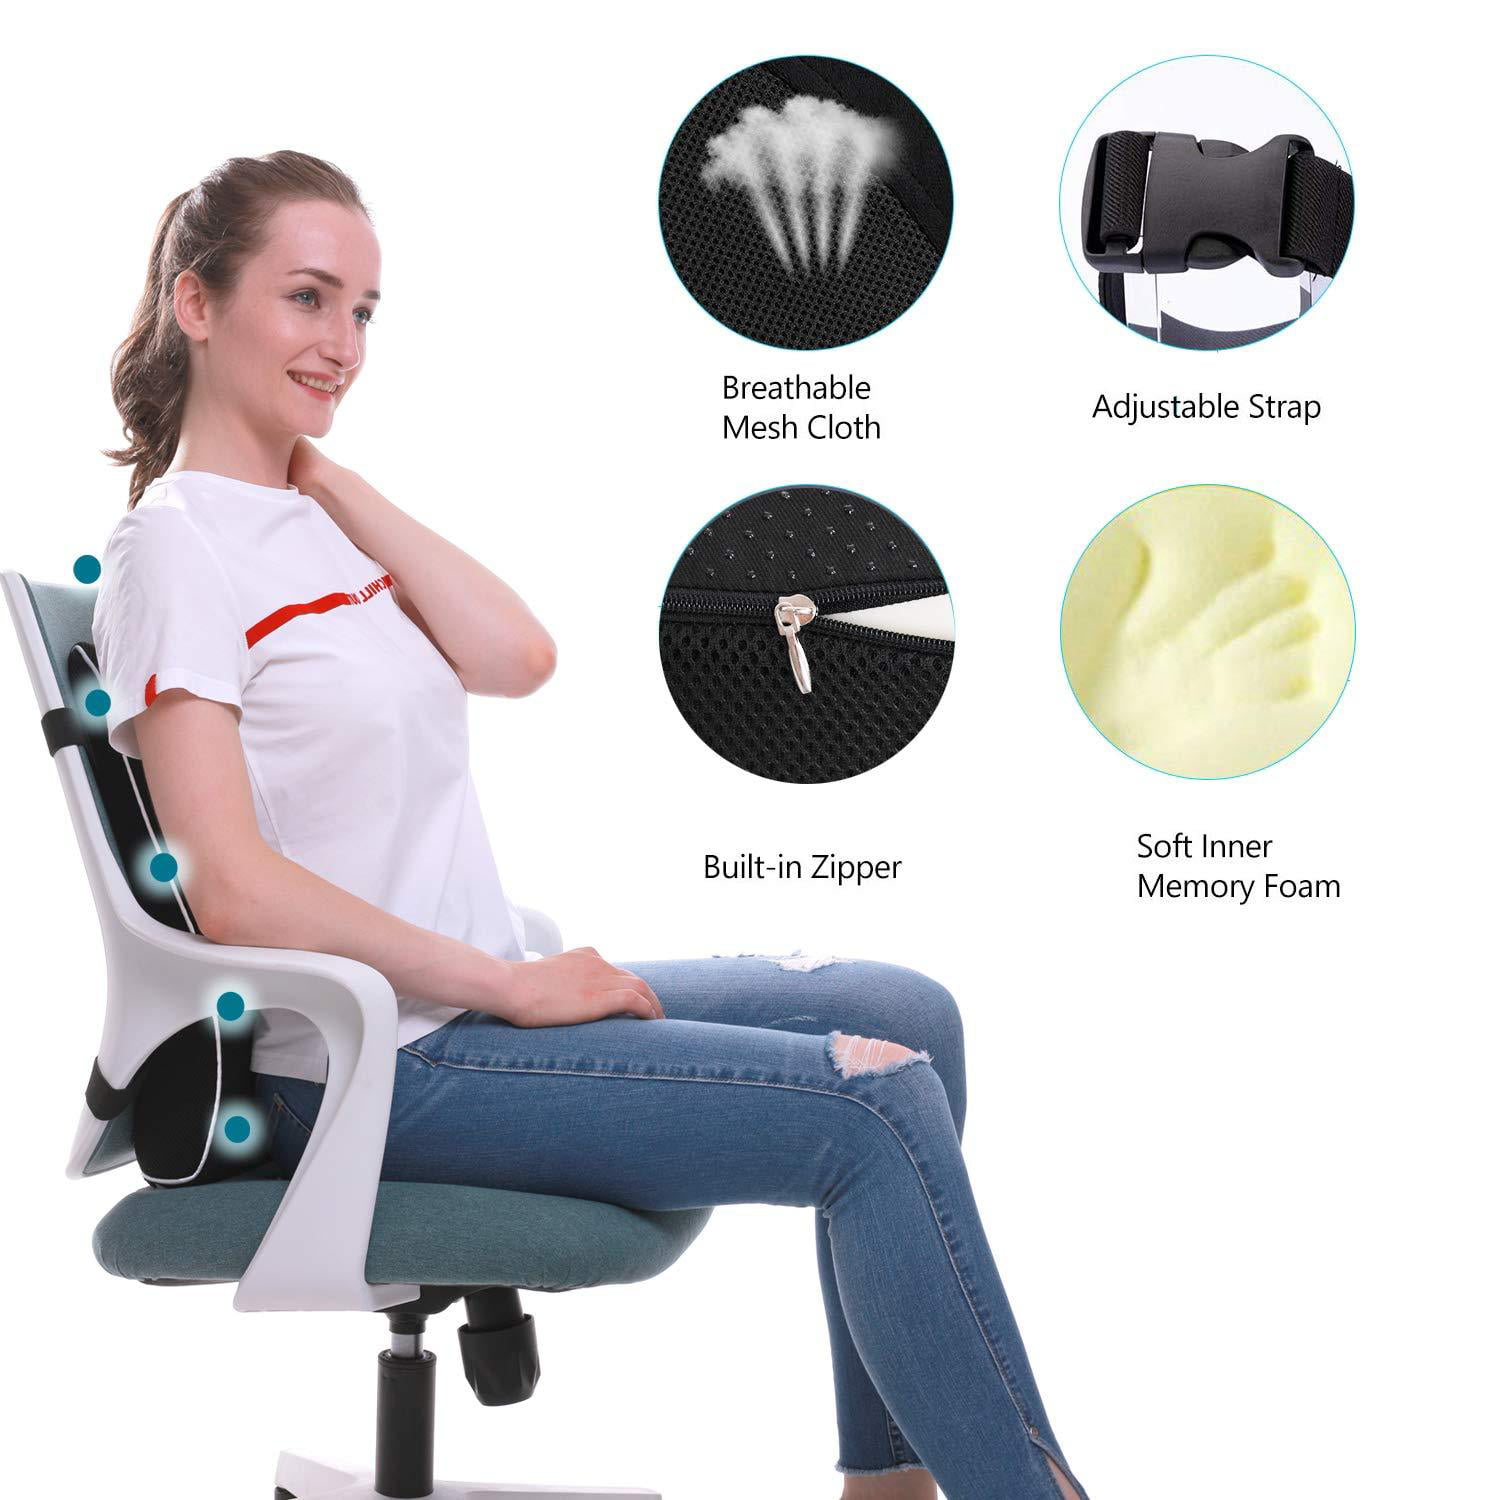 aag Memory Foam Lumbar Support Back Cushion,Ergonomic 3D Ventilative Mesh Lumbar Support Pillow,Orthopedic Design for Lower Back Pain Relief,Adjustable Straps for Car,Recliner or Office Chair 